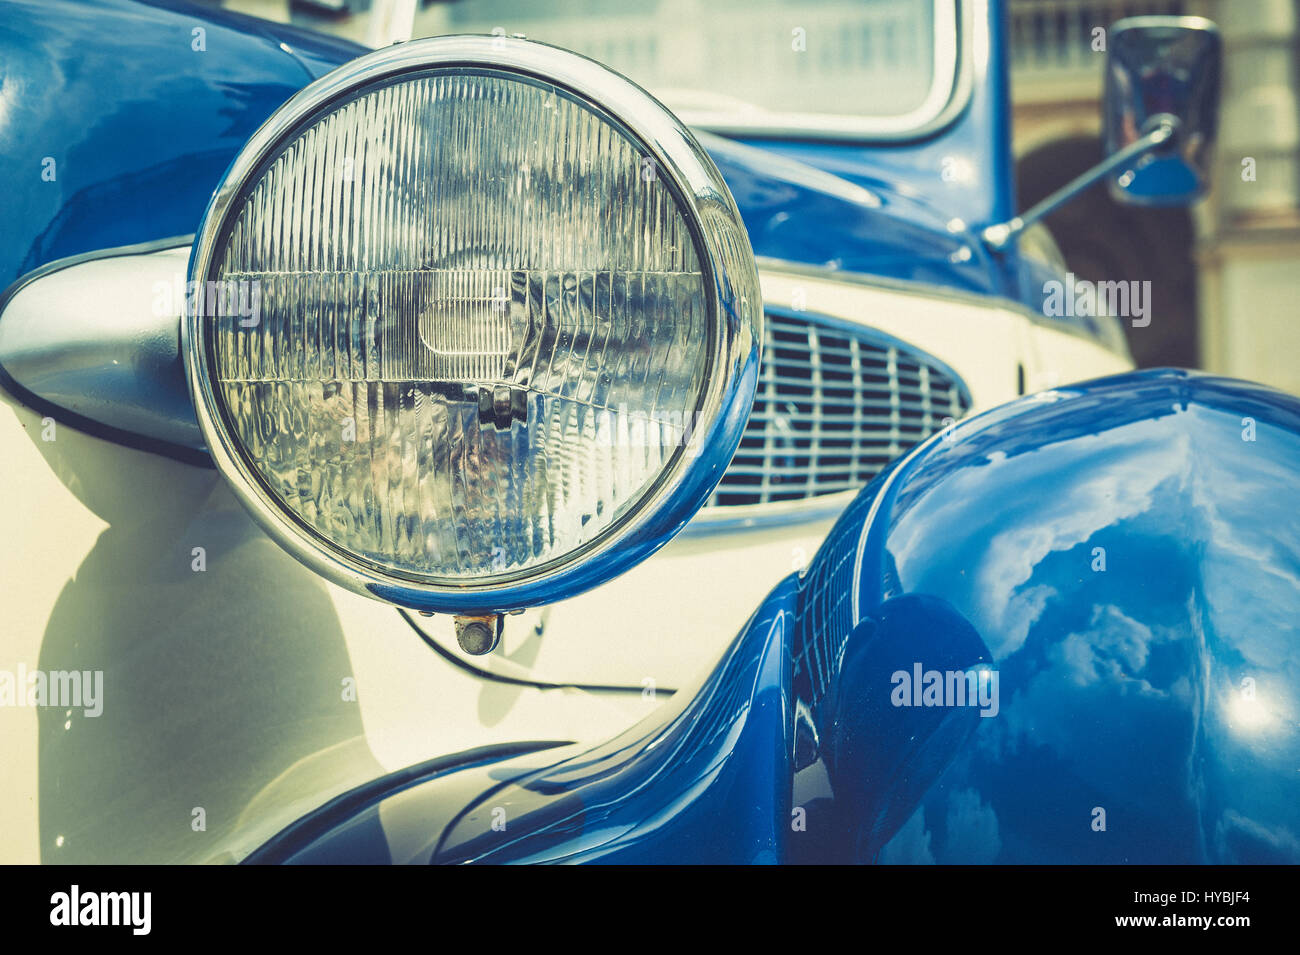 Vintage classic car front view with headlight Stock Photo